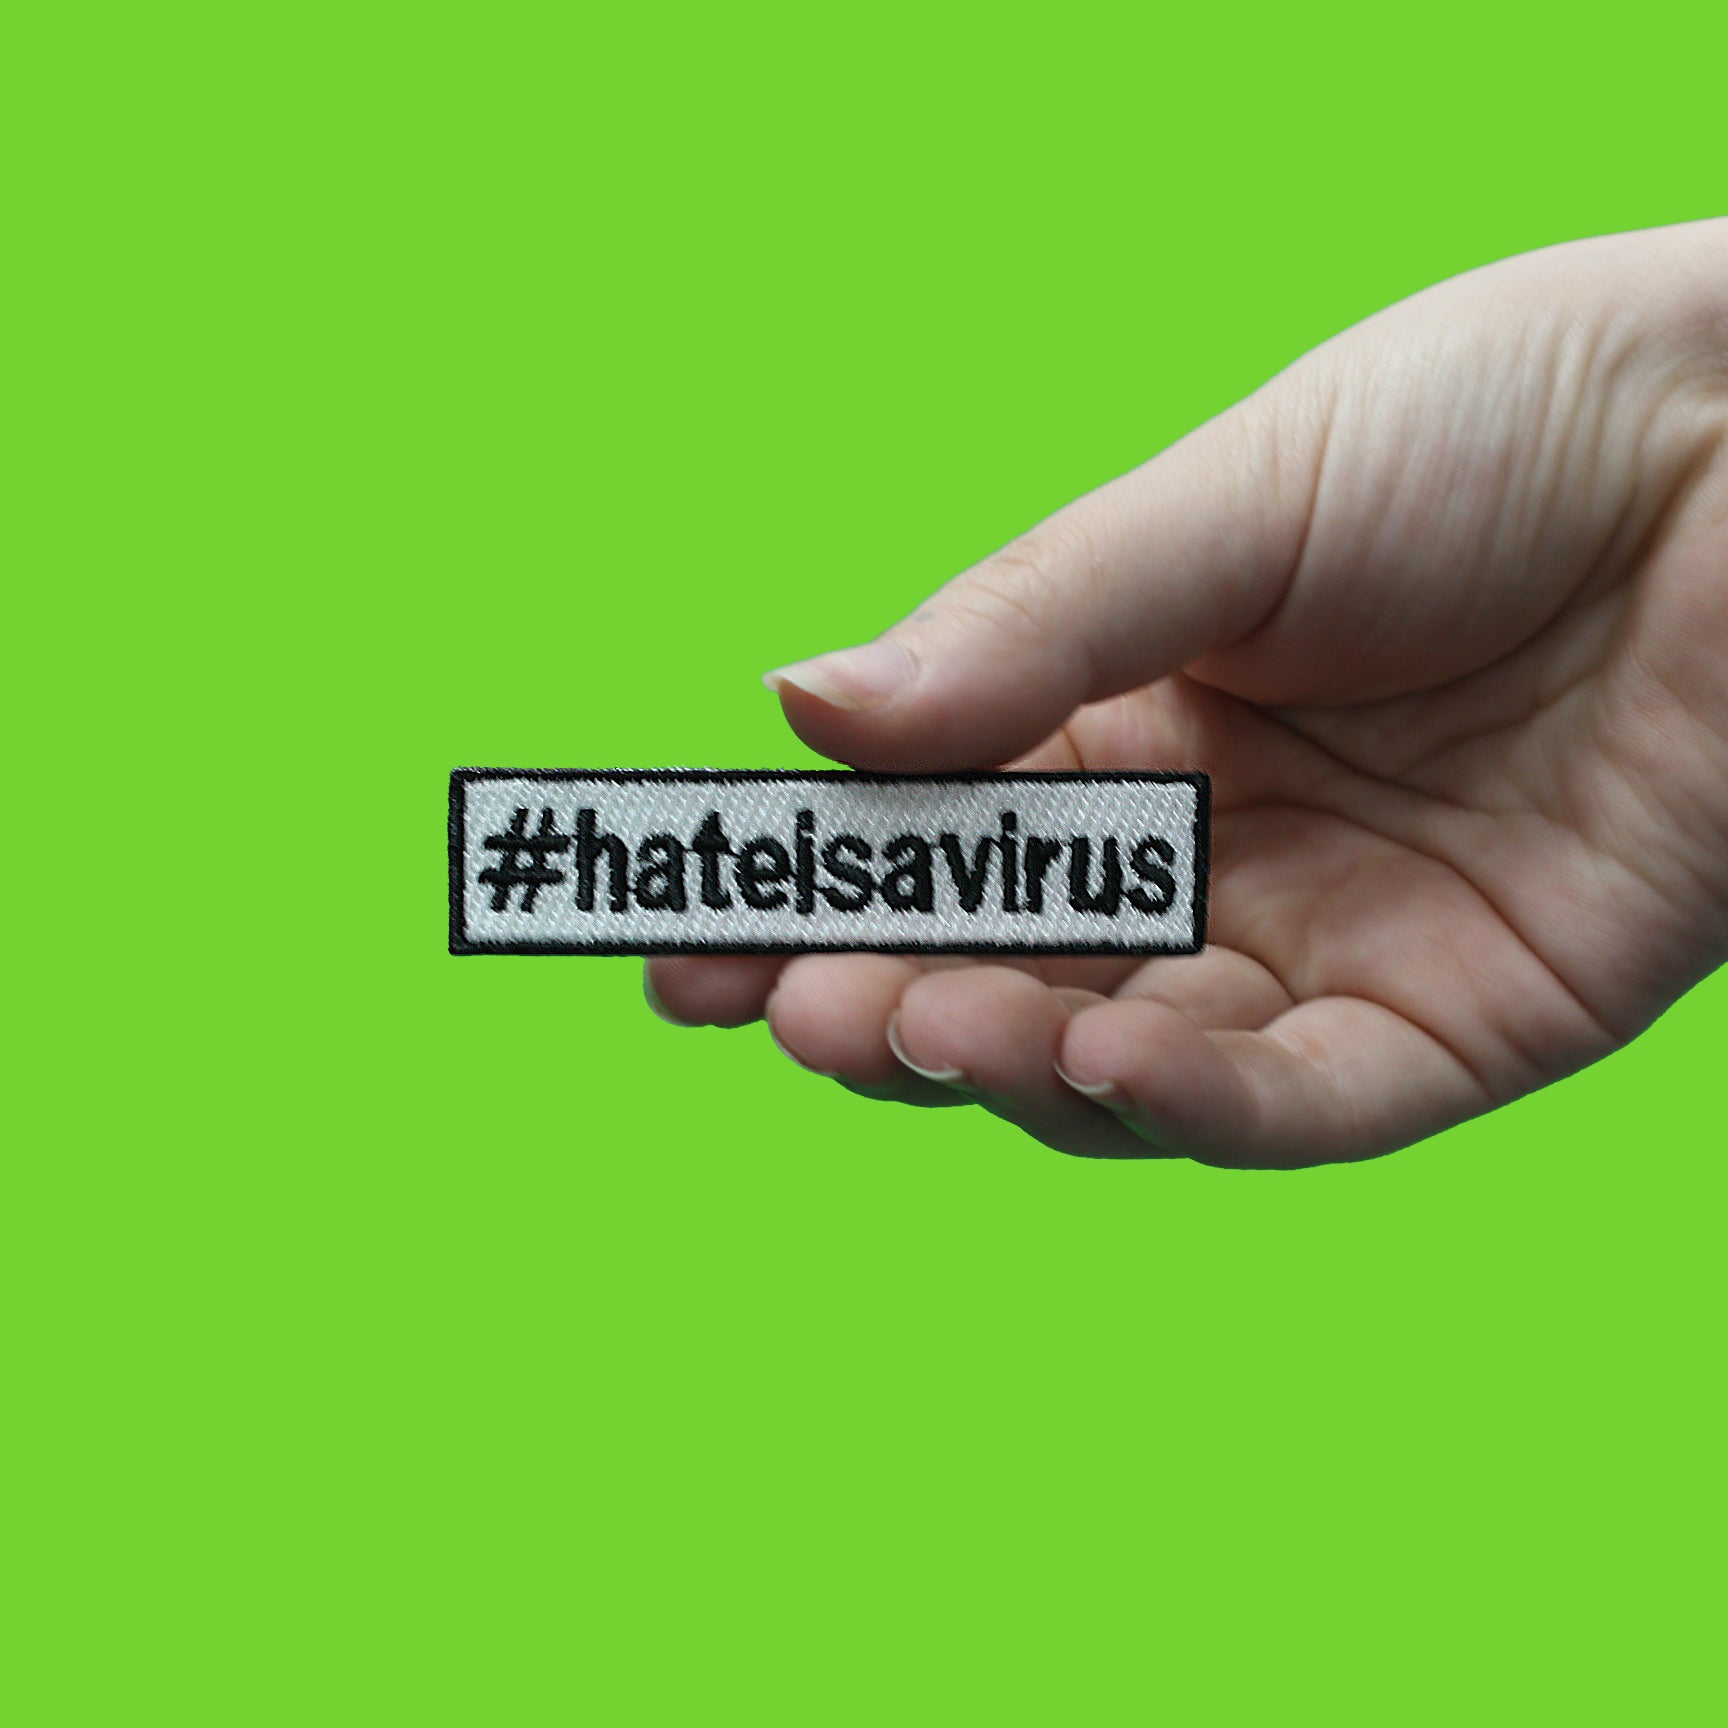 Hate Is A Virus Hashtag Box Logo Embroidered Iron On Patch 